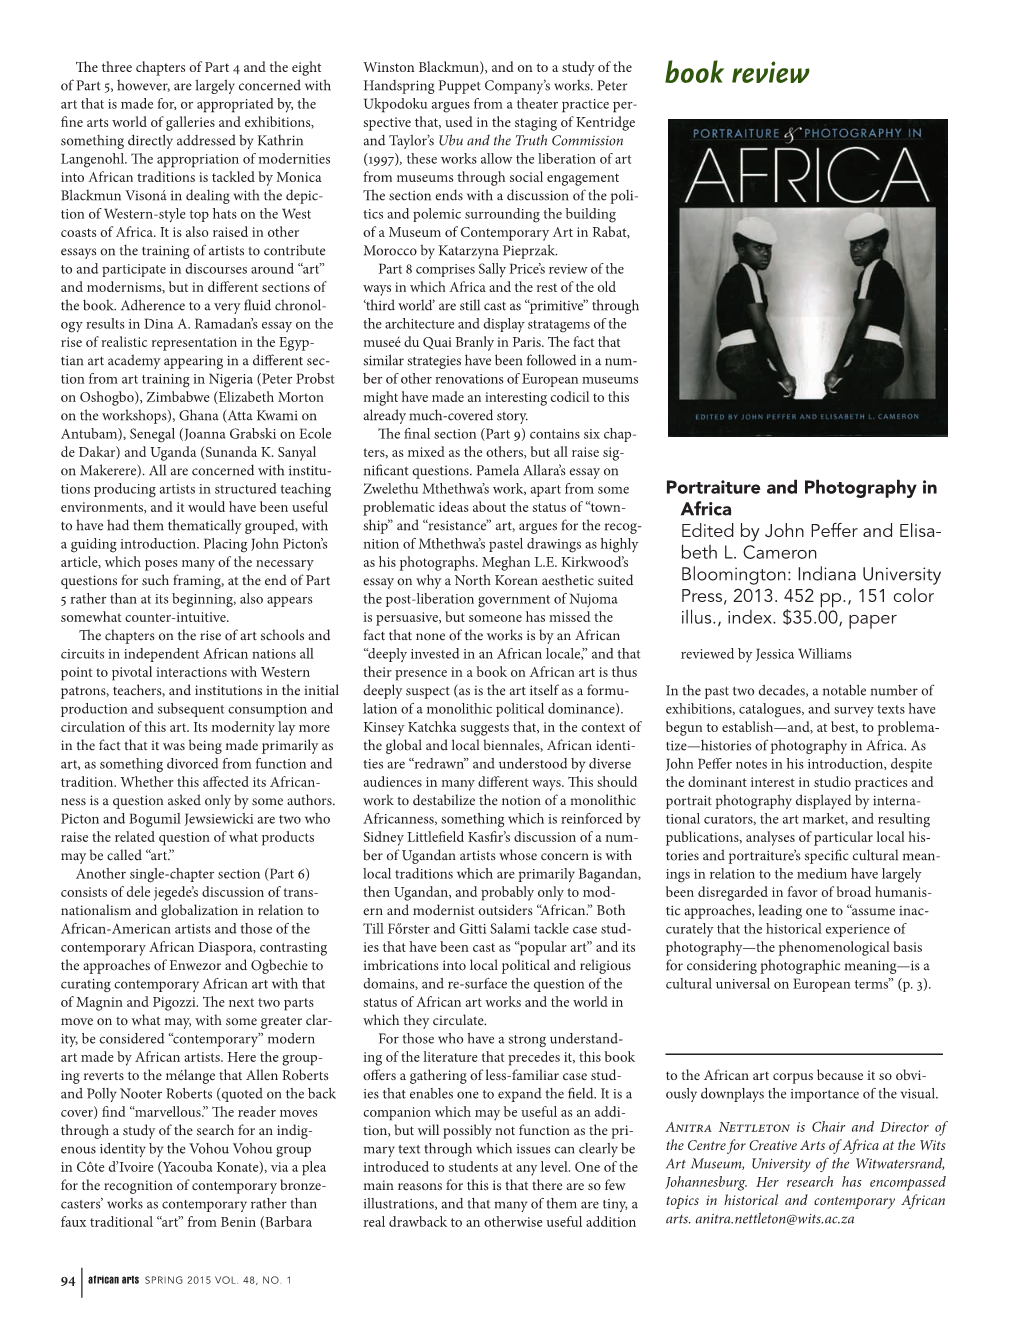 Williams.Portraiture and Photography in Africa.Book Review.Pdf